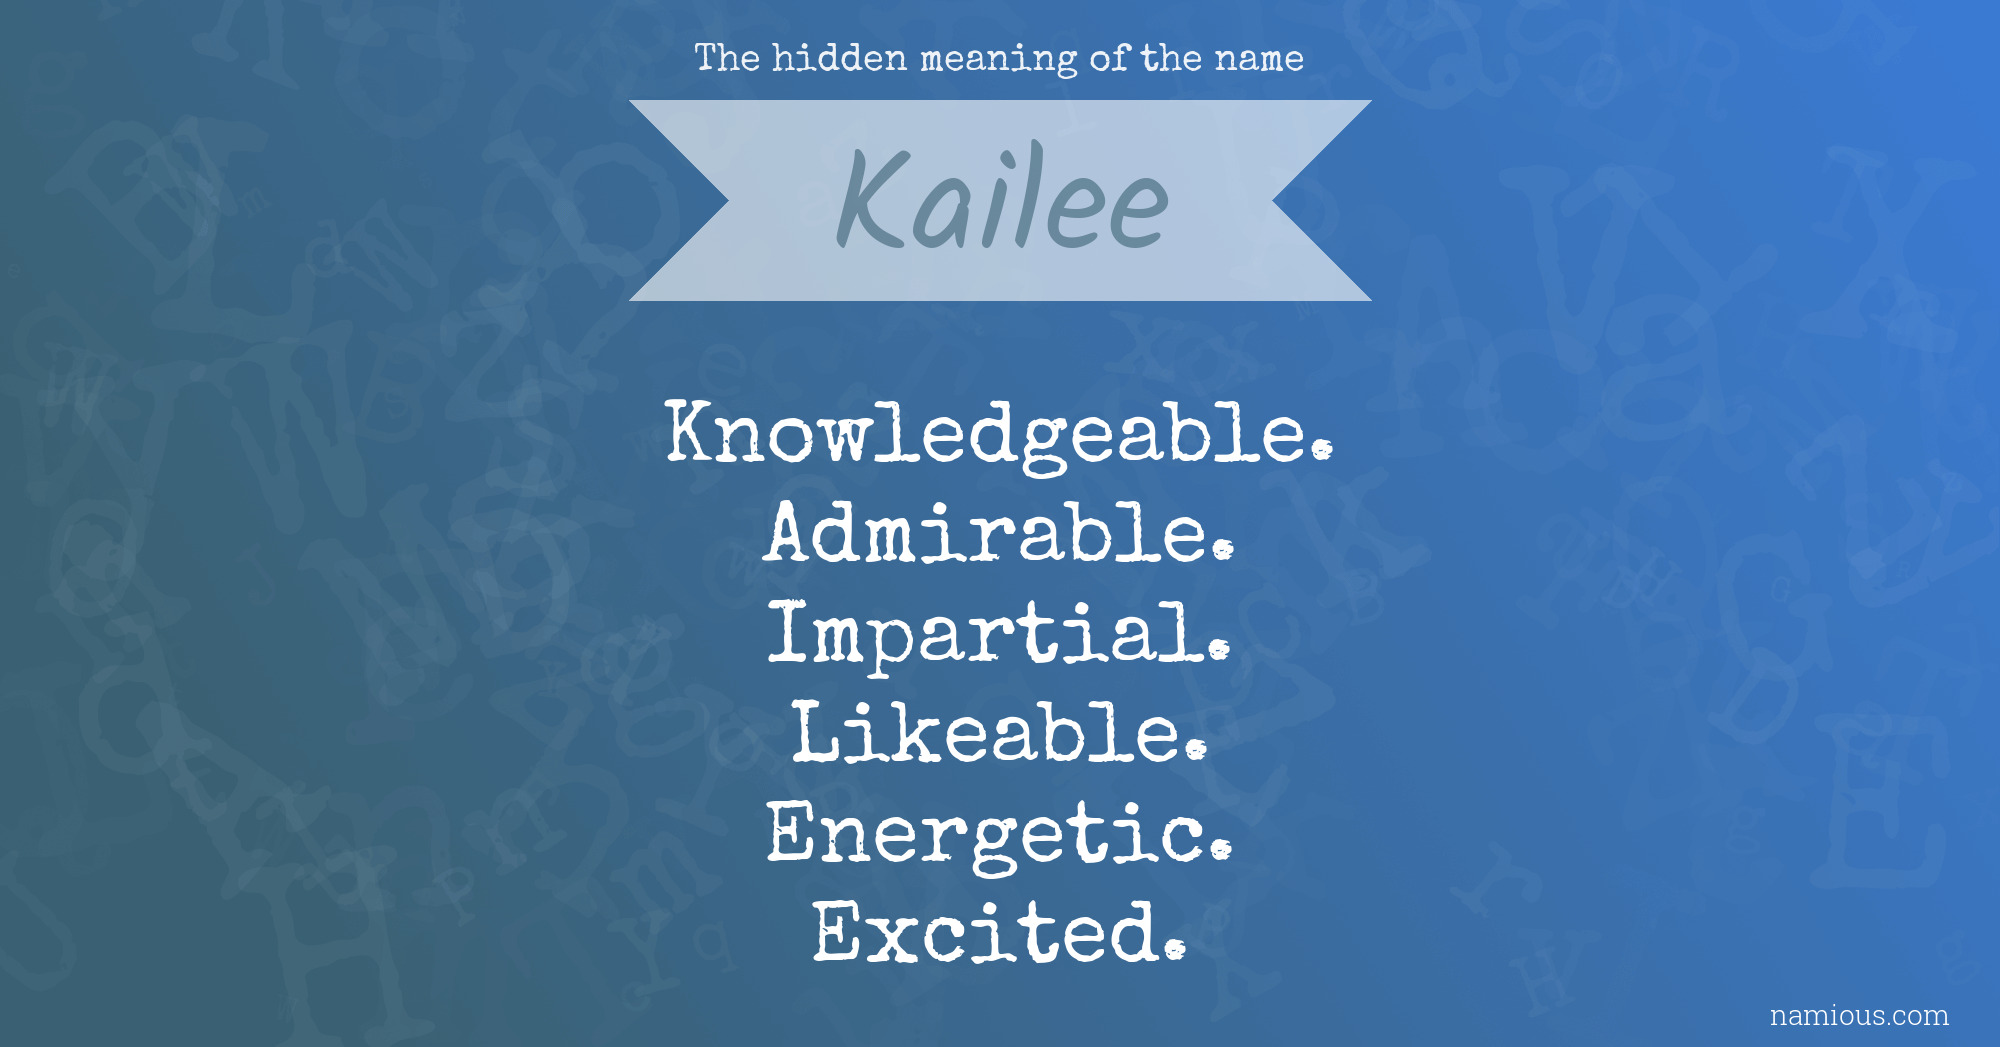 The hidden meaning of the name Kailee